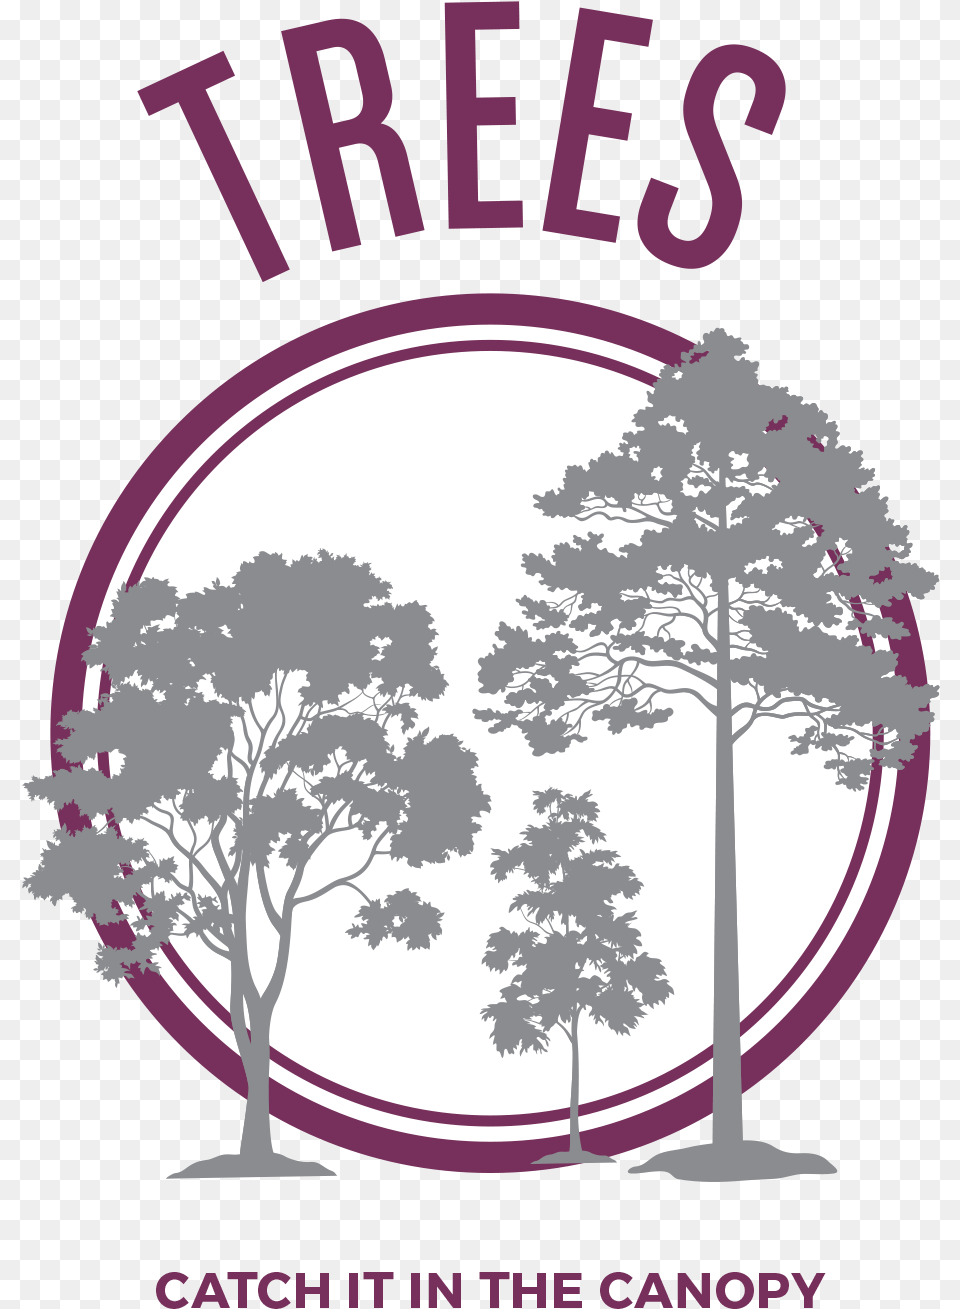 Tree Cattle Farm, Plant, Sticker, Advertisement, Poster Png Image